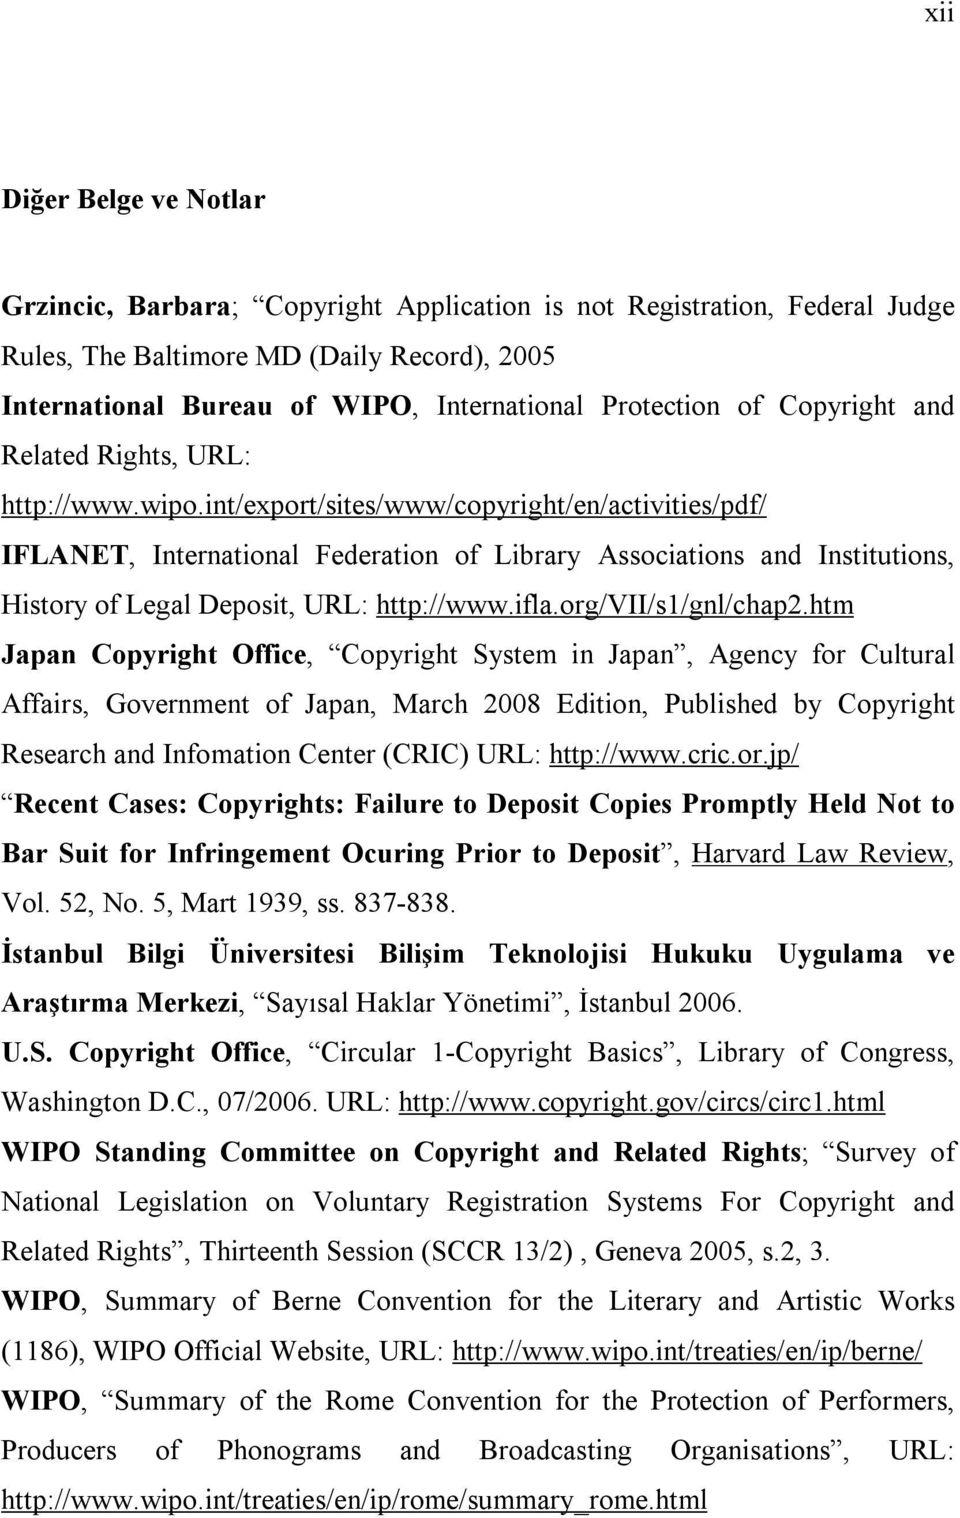 int/export/sites/www/copyright/en/activities/pdf/ IFLANET, International Federation of Library Associations and Institutions, History of Legal Deposit, URL: http://www.ifla.org/vii/s1/gnl/chap2.